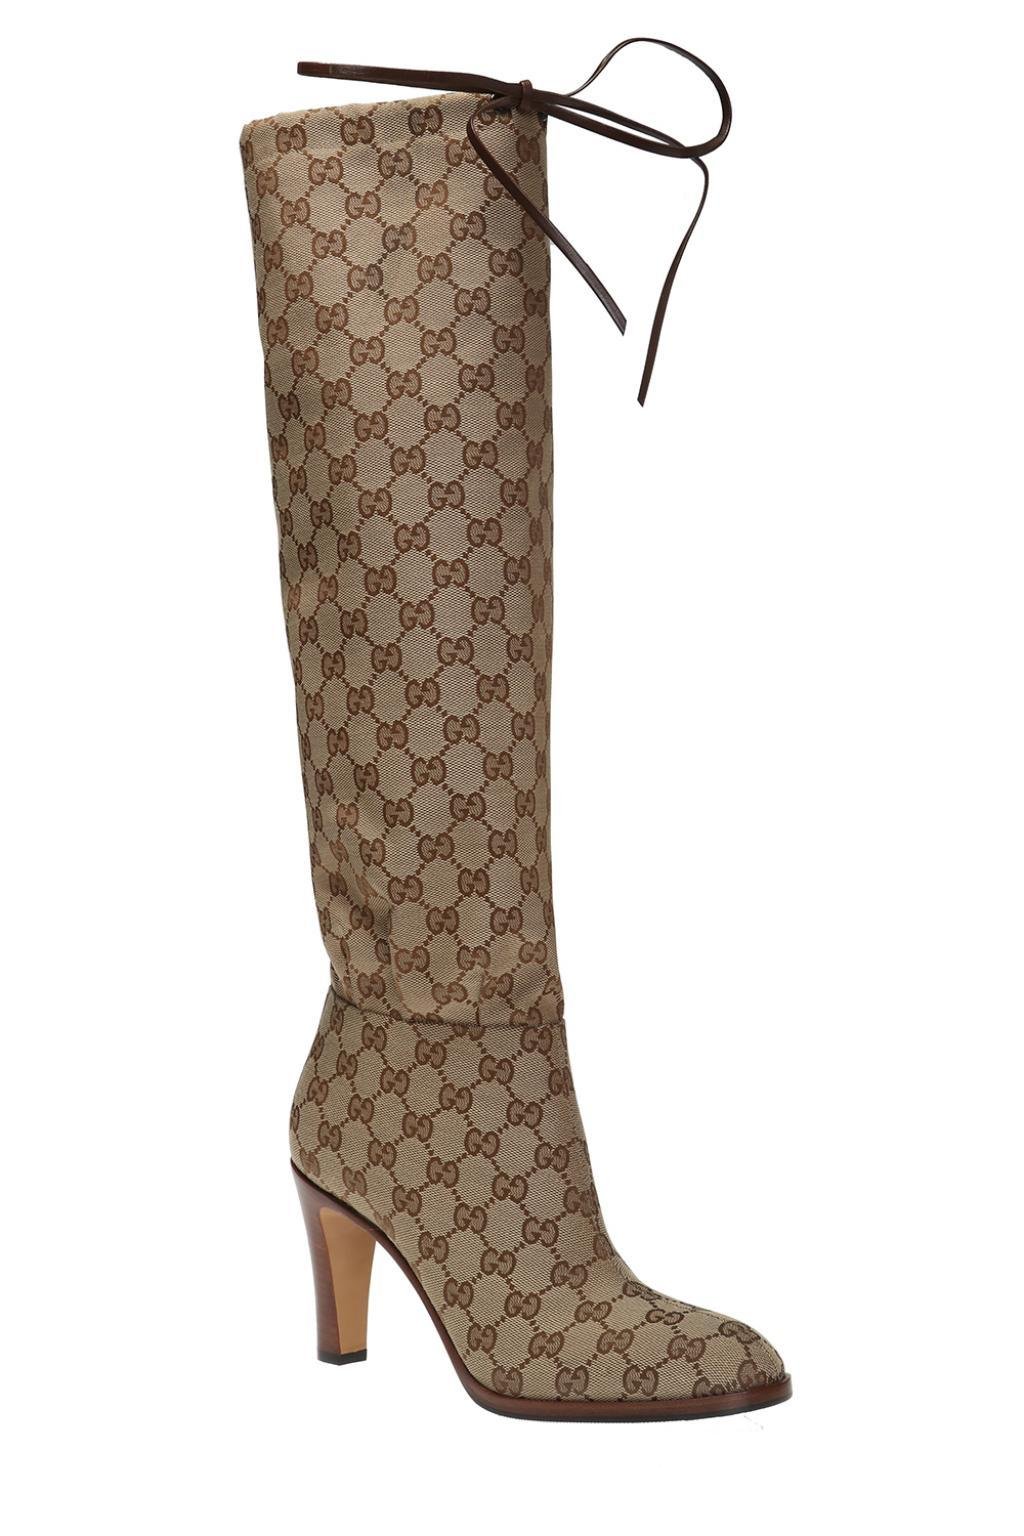 Gucci Original GG Over-the-knee Boots 